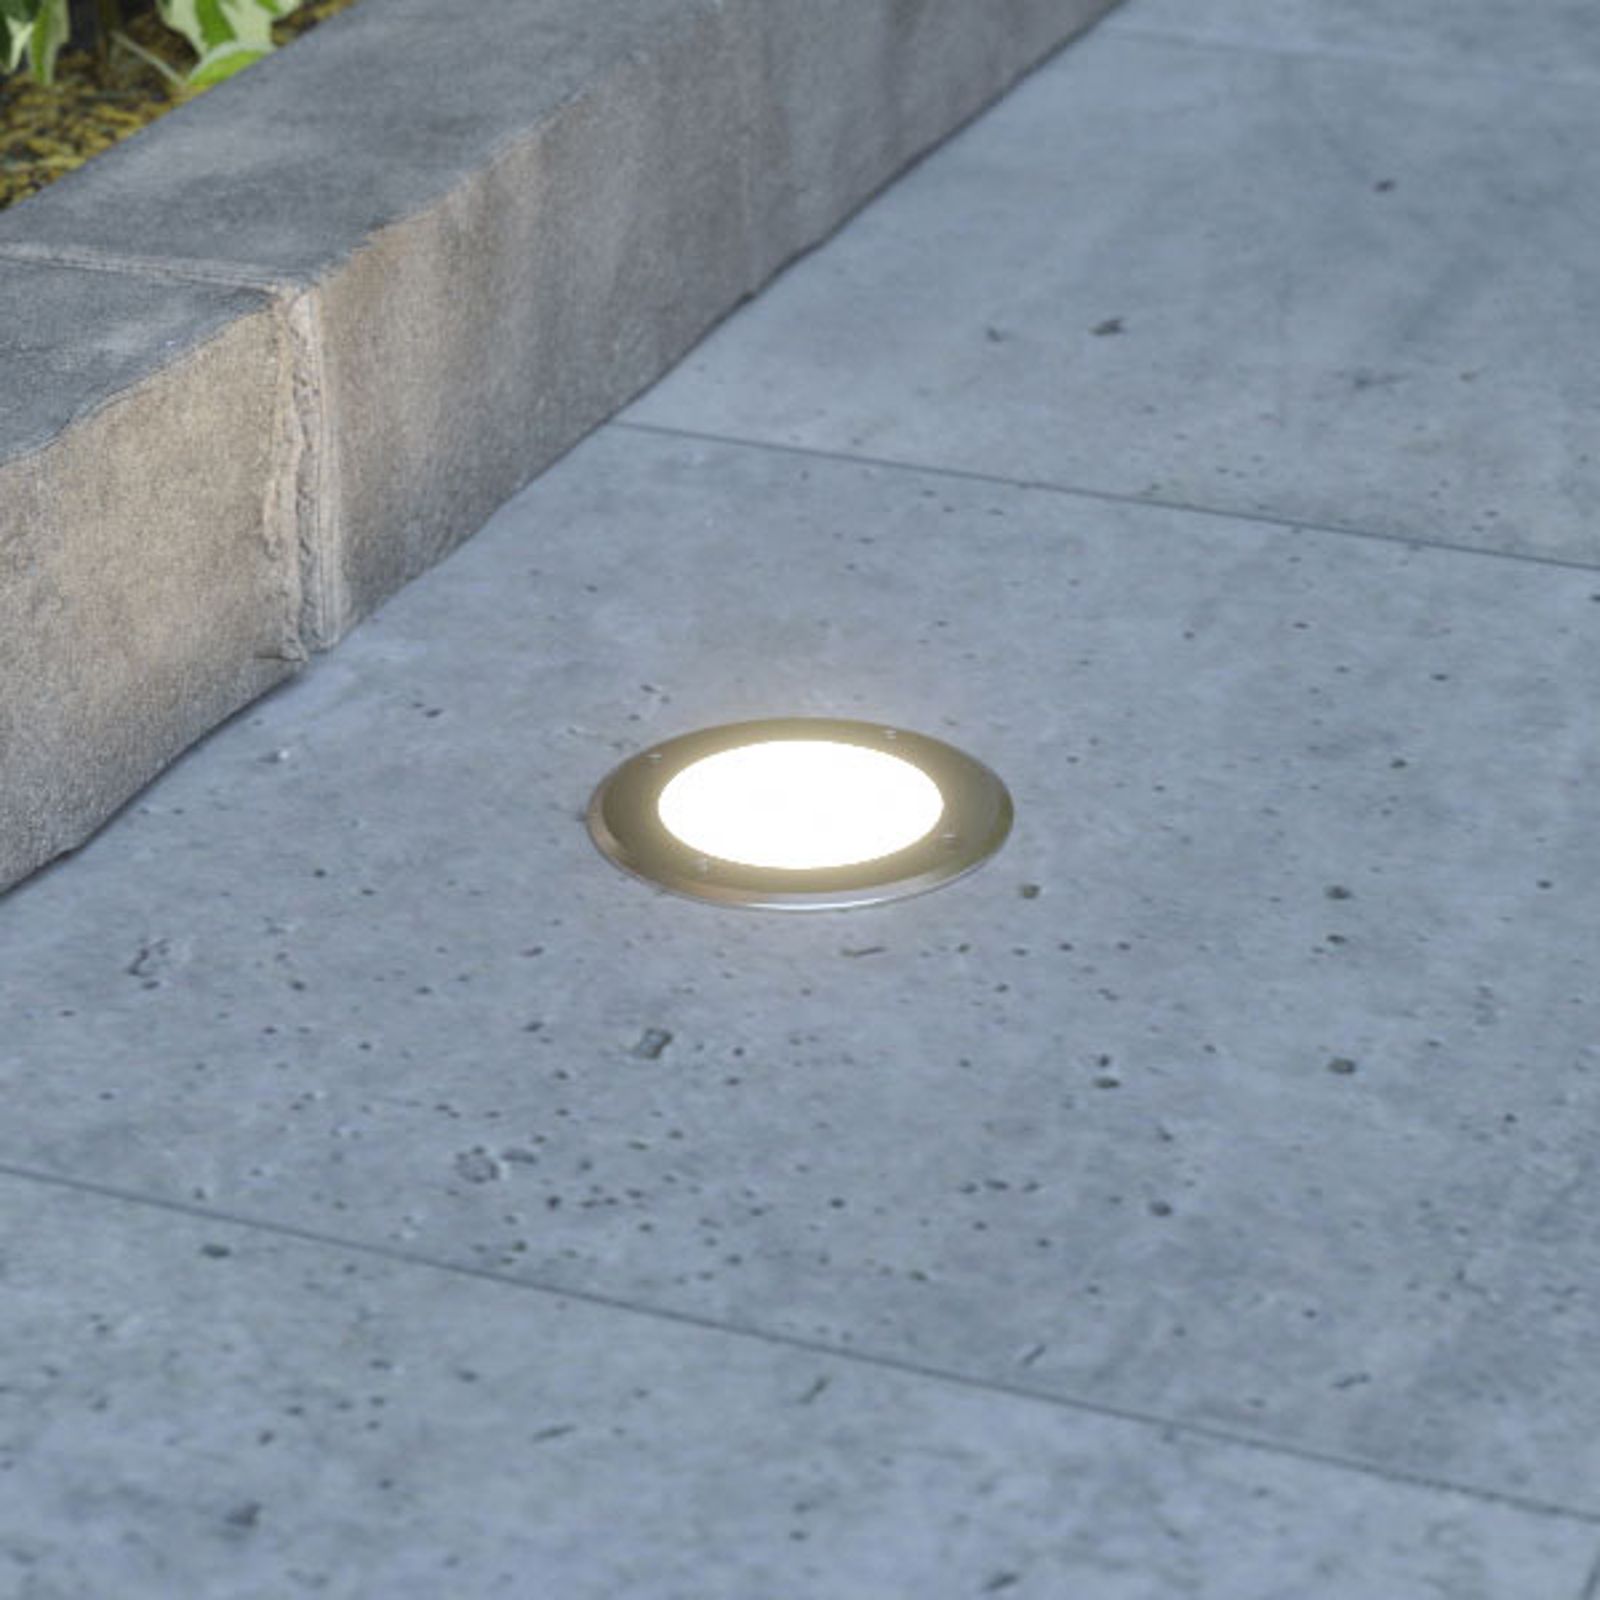 Recessed Outdoor Lighting Illuminate Your Outdoor Space with Stylish and Functional Lighting Options